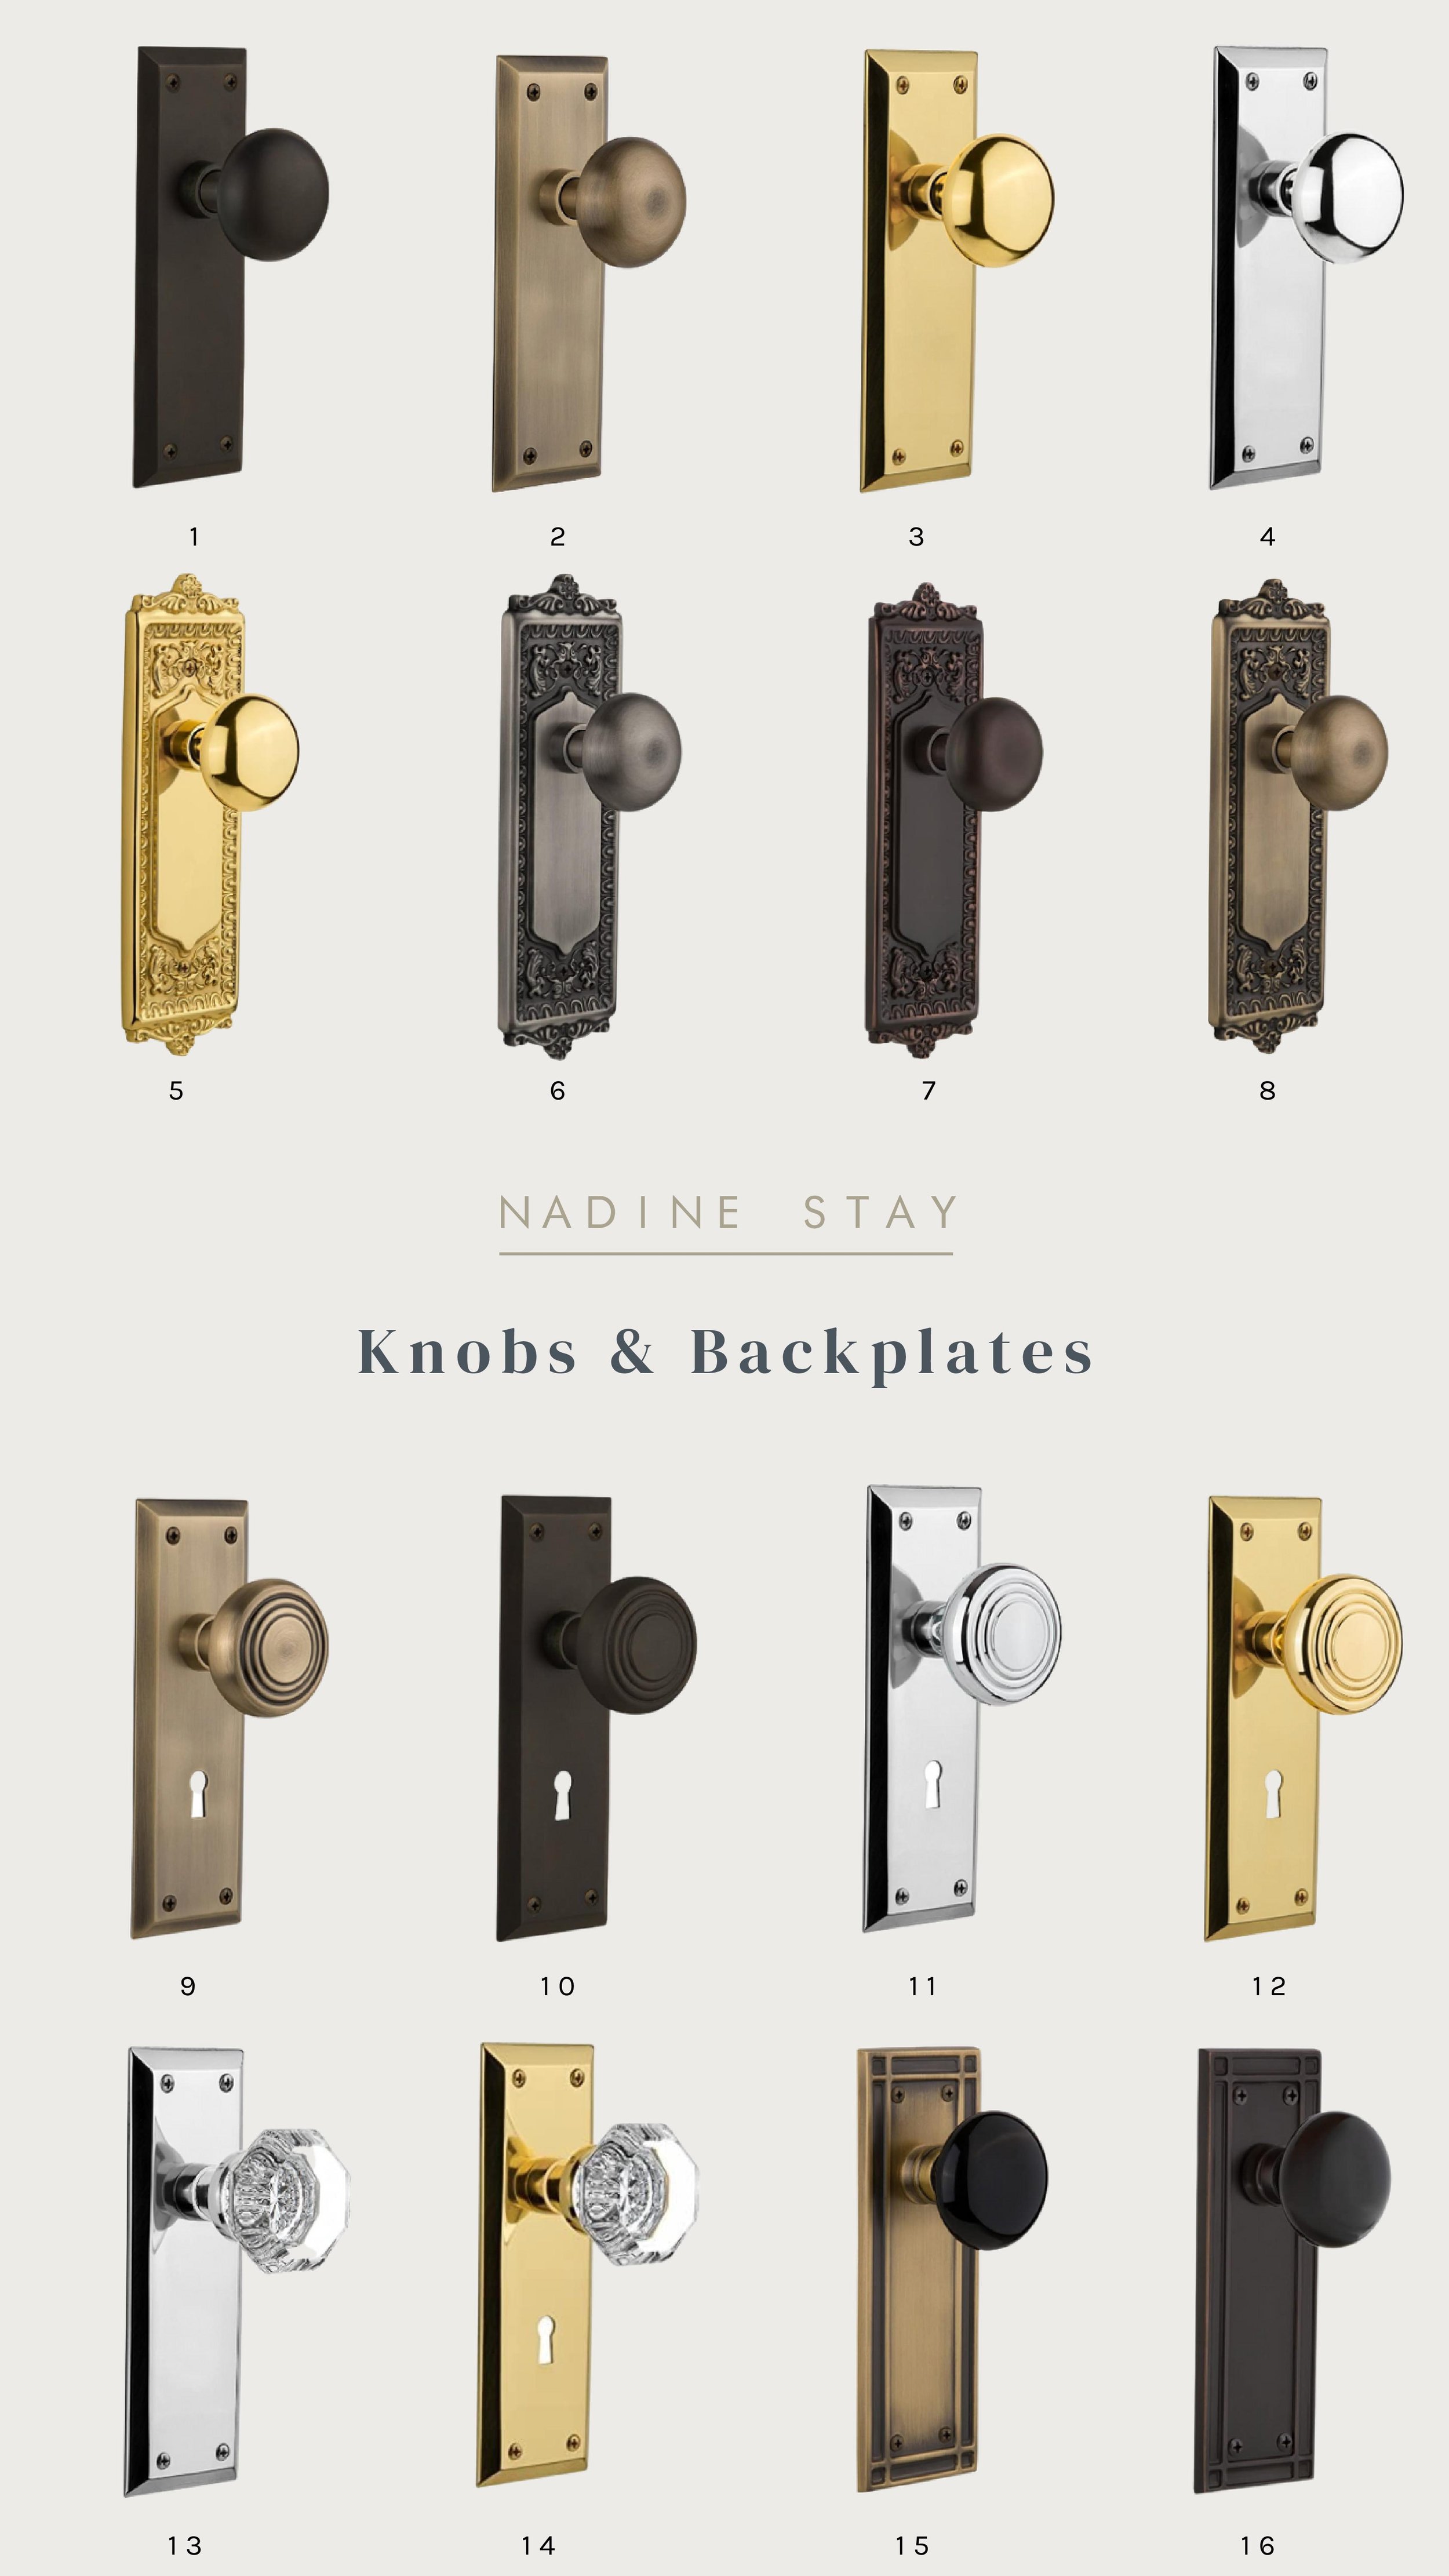 Knobs and backplates for closet doors, bifold doors, and double doors. Antique replica door knobs in antique brass, unlacquered brass, bronze, chrome, nickel, and pewter. | Nadine Stay